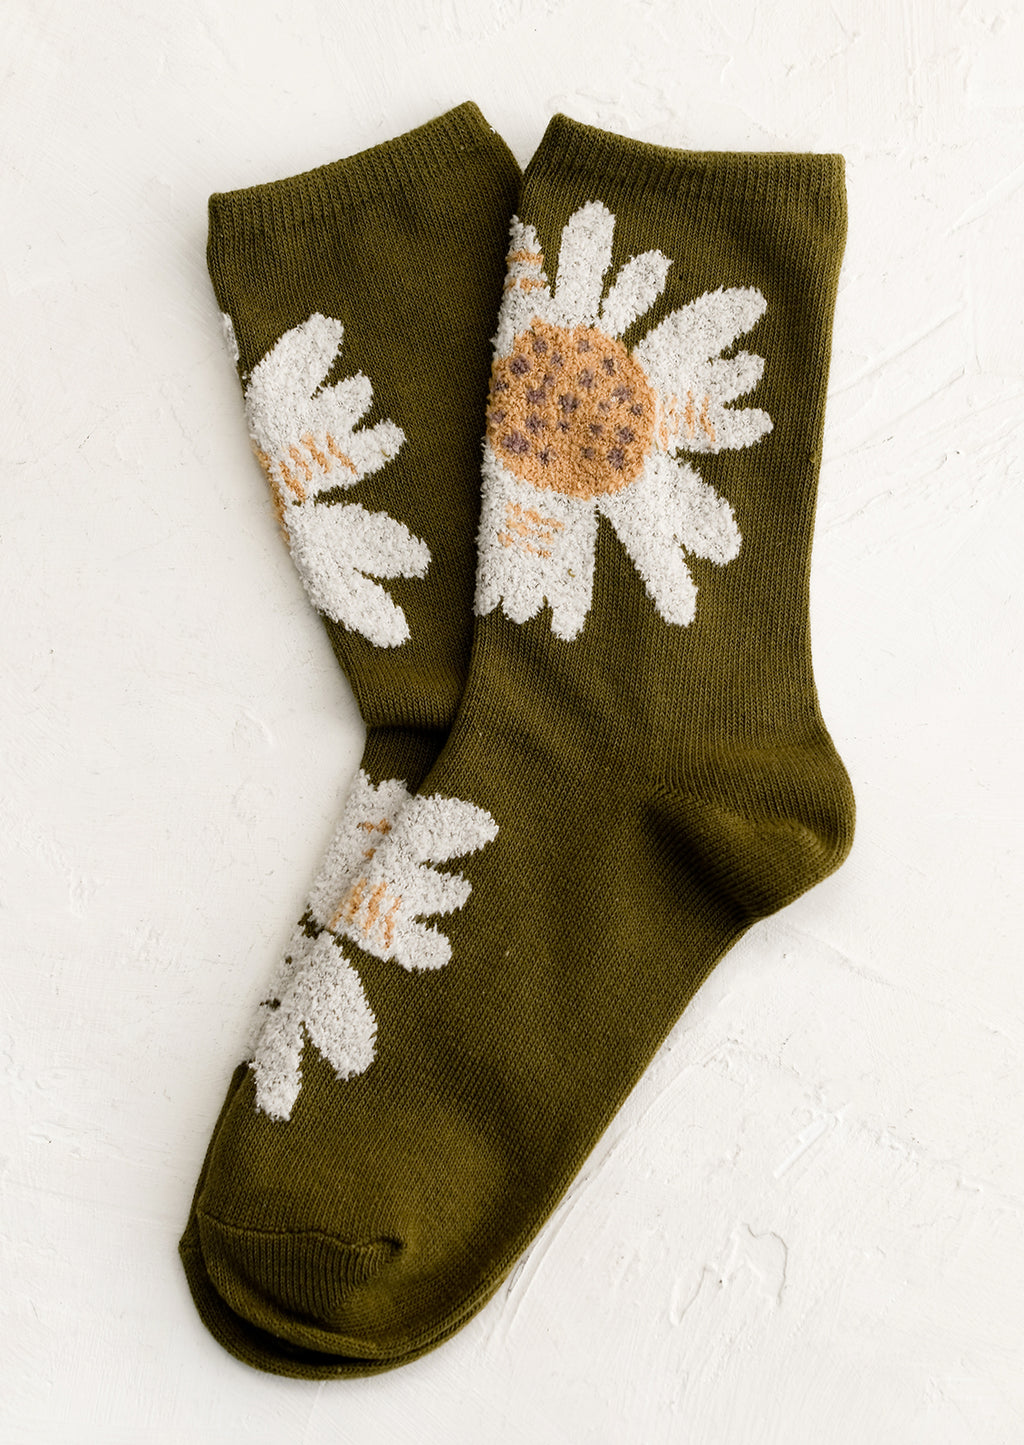 Olive: A pair of olive colored socks with fuzz textured, white-colored flowers.